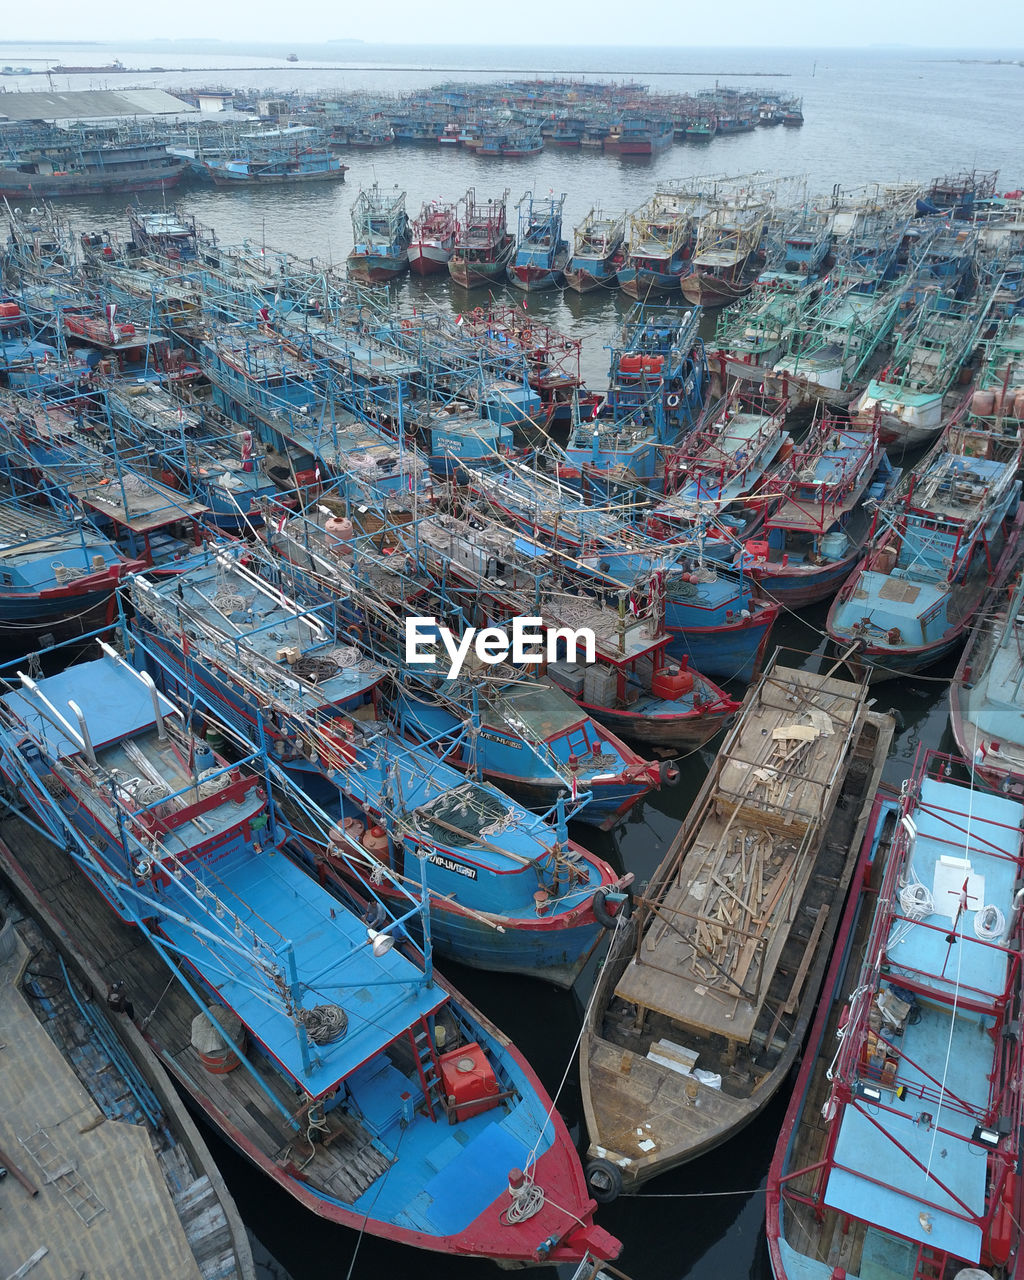 HIGH ANGLE VIEW OF FISHING BOATS MOORED IN HARBOR